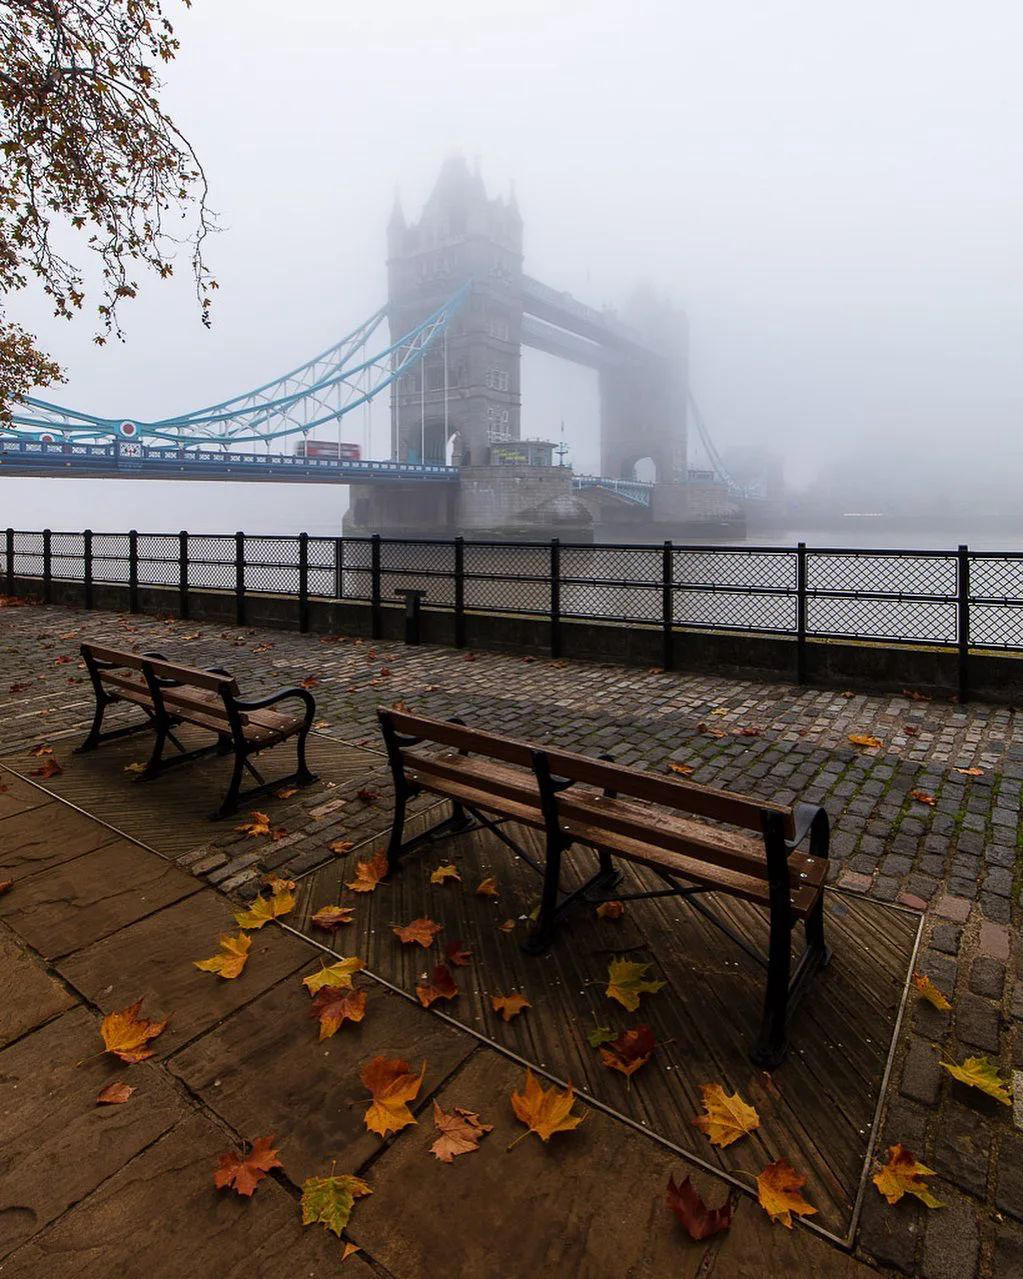 Best of London in your pocket - Good foggy morning